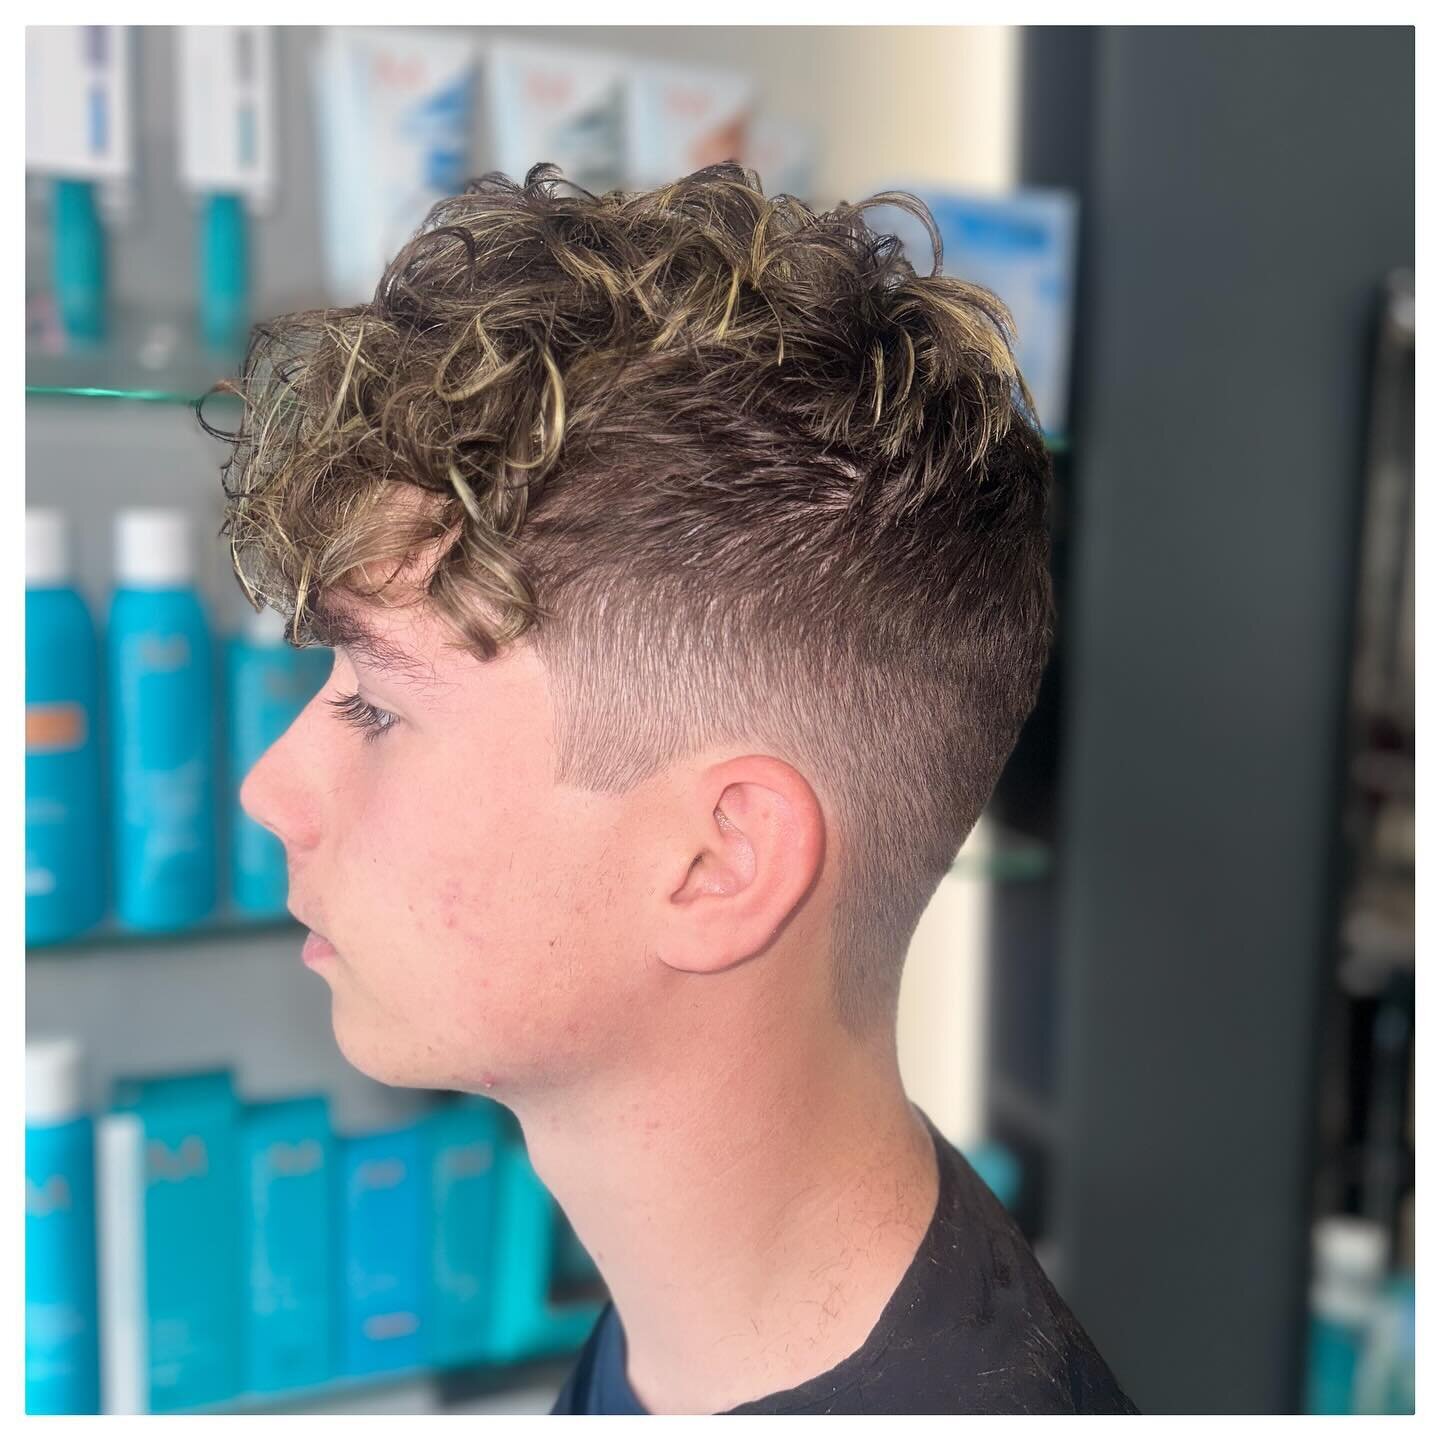 &bull; S U N K I S S E D  C U R L S &bull; 

Complete transformation by Charlotte and Georgia on Will🤩 

Charlotte added highlights to enhance his natural curl giving texture through the top. Finished with a grade 1 fade by Georgia 🙌🏼

Colour - @s